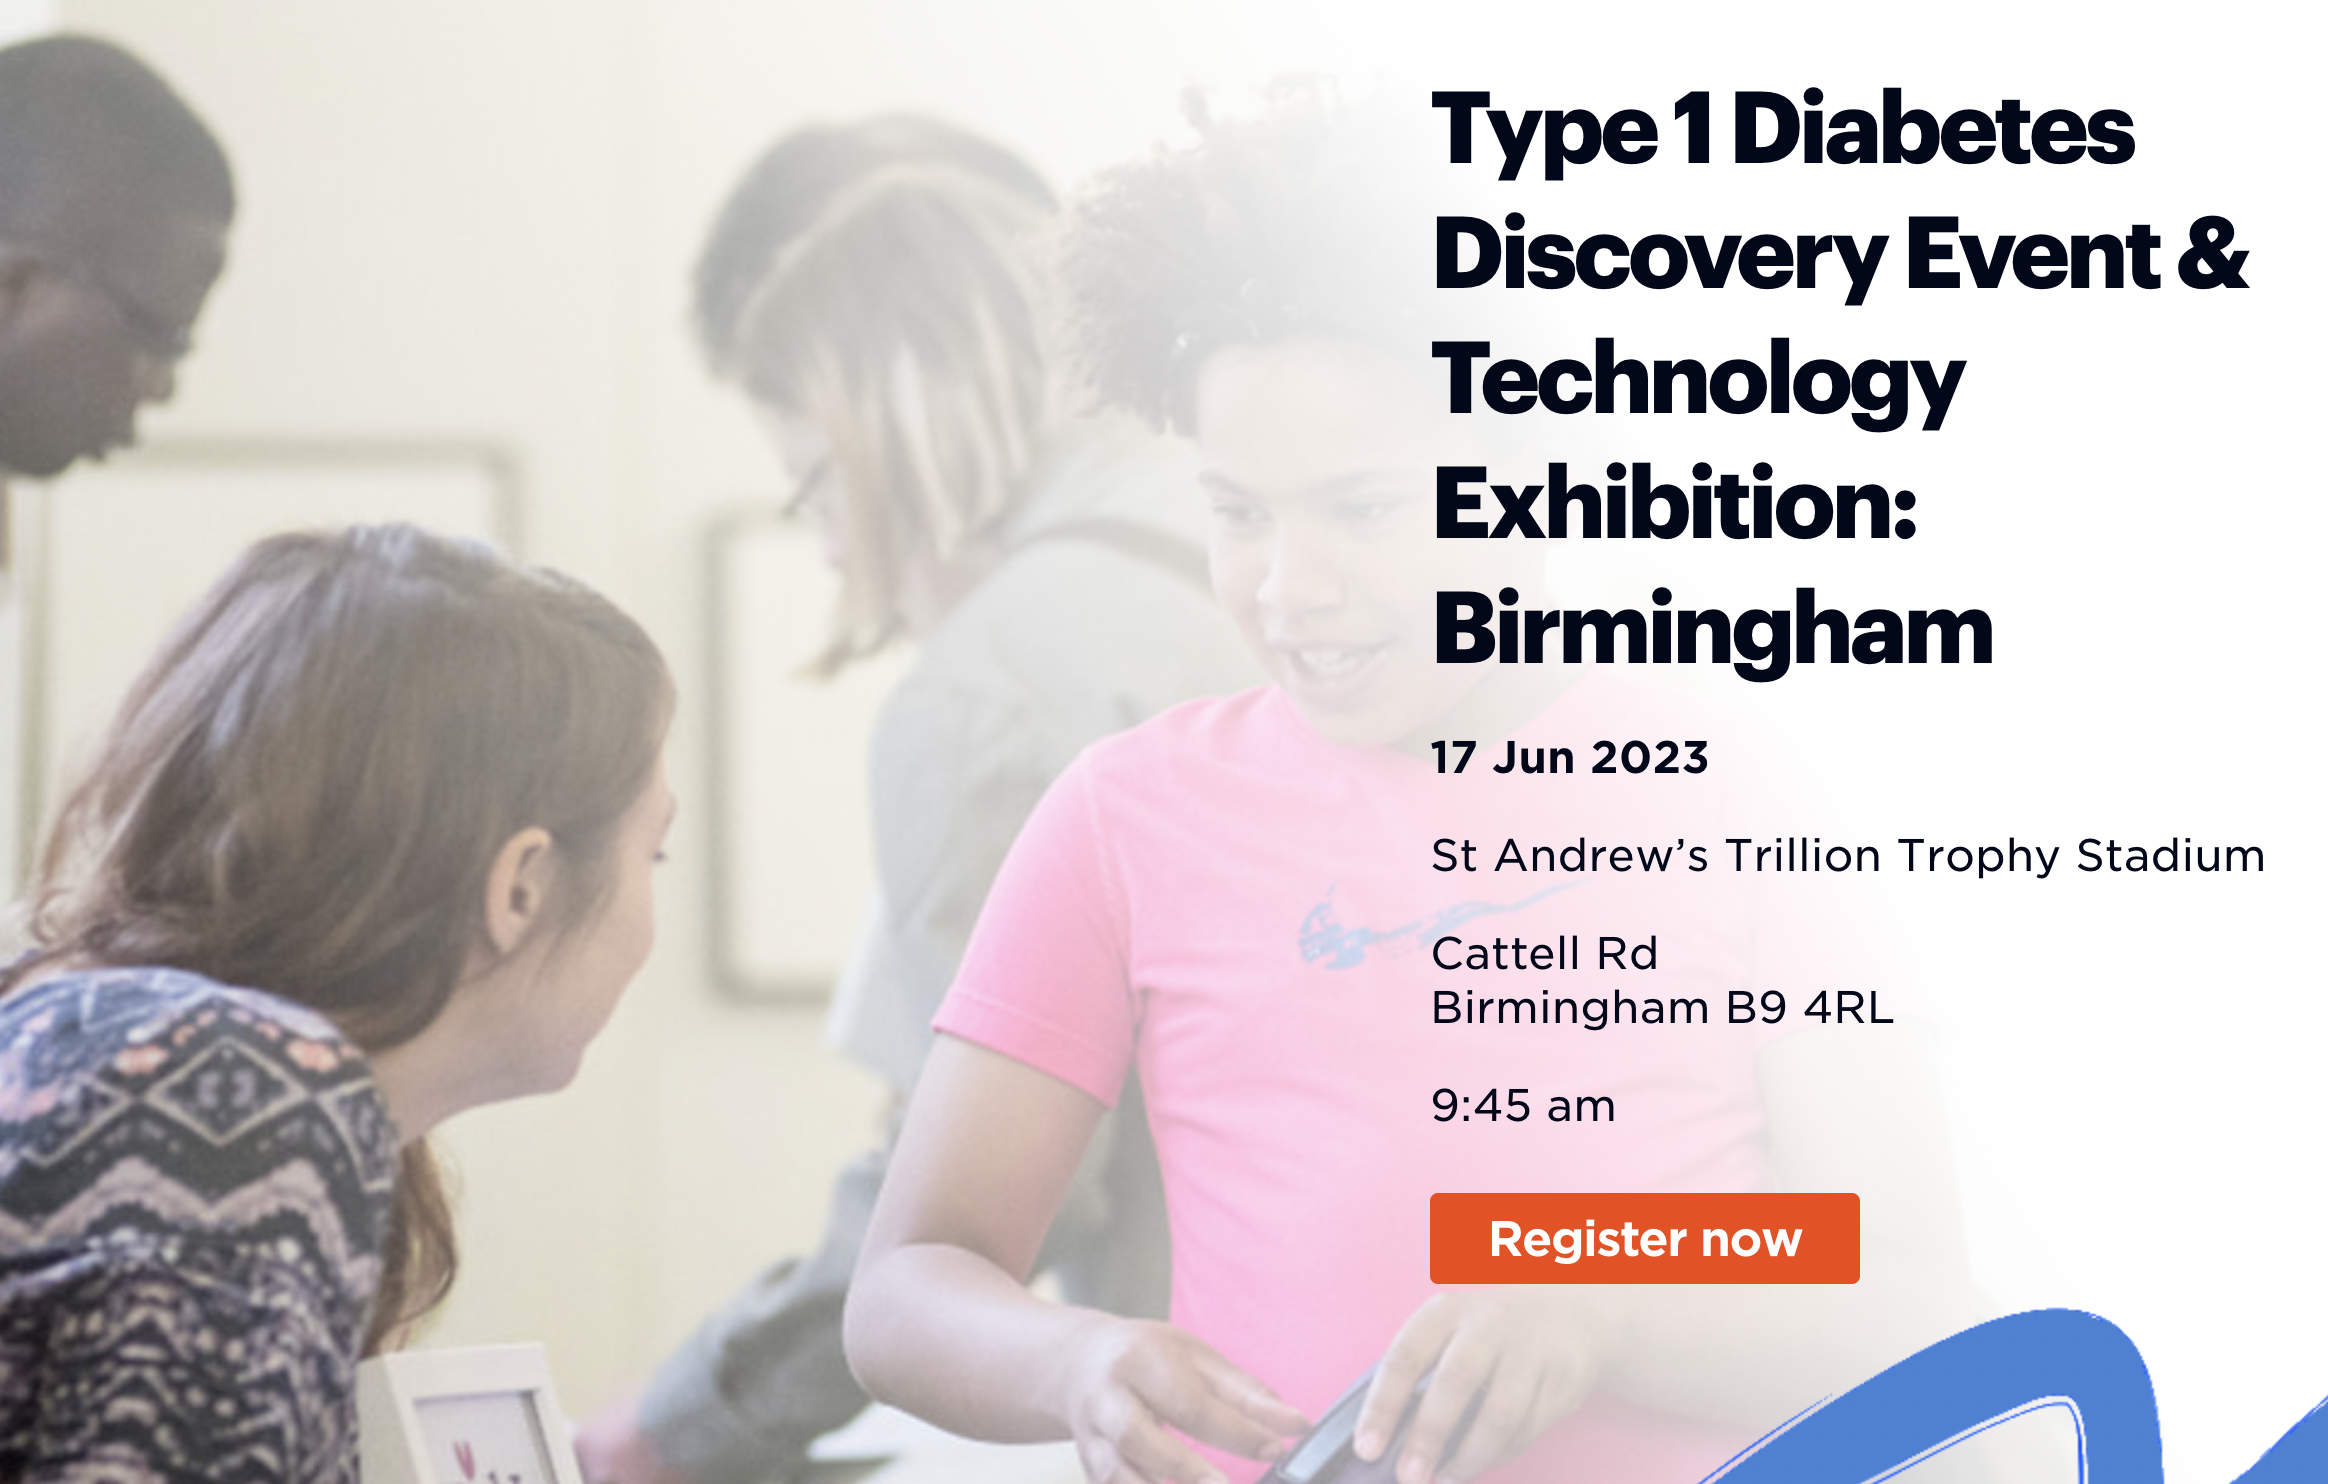 DigiBete at the JDRF Type 1 Diabetes Discovery Event & Technology Exhibition in Birmingham on the 17th June (This Saturday!)